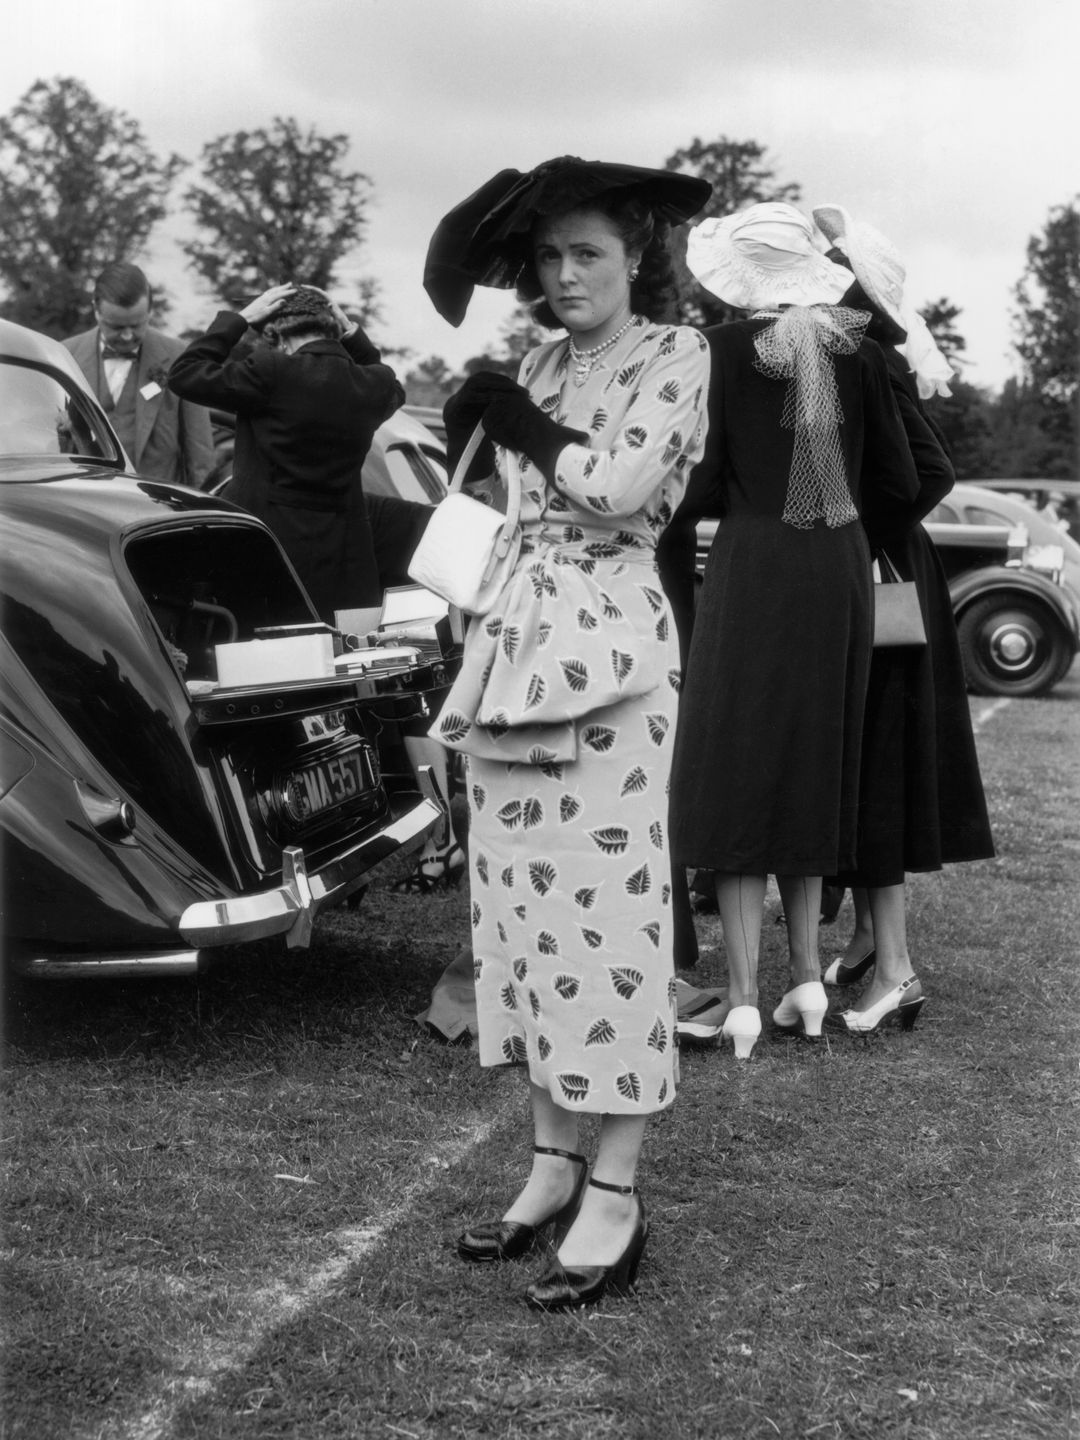 15 June 1948: Mrs Randolph Churchill (born Pamela Digby, later Pamela Harriman) arrives at Ascot. (Photo: Topical Press Agency/Getty Images)